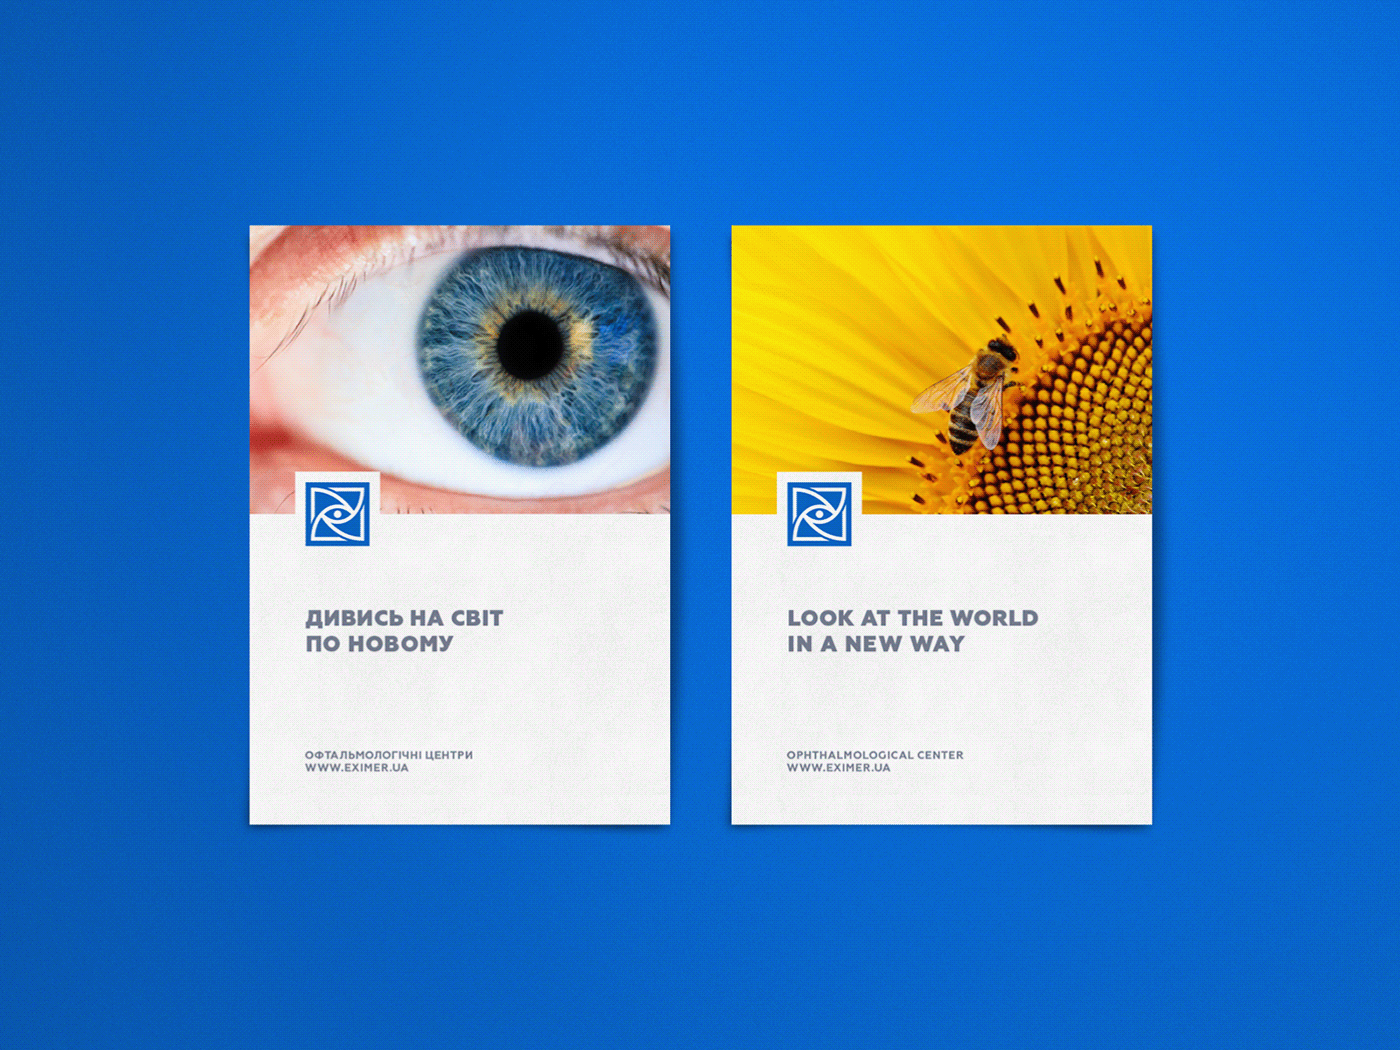 Logo and visual identity for the ophthalmological centers